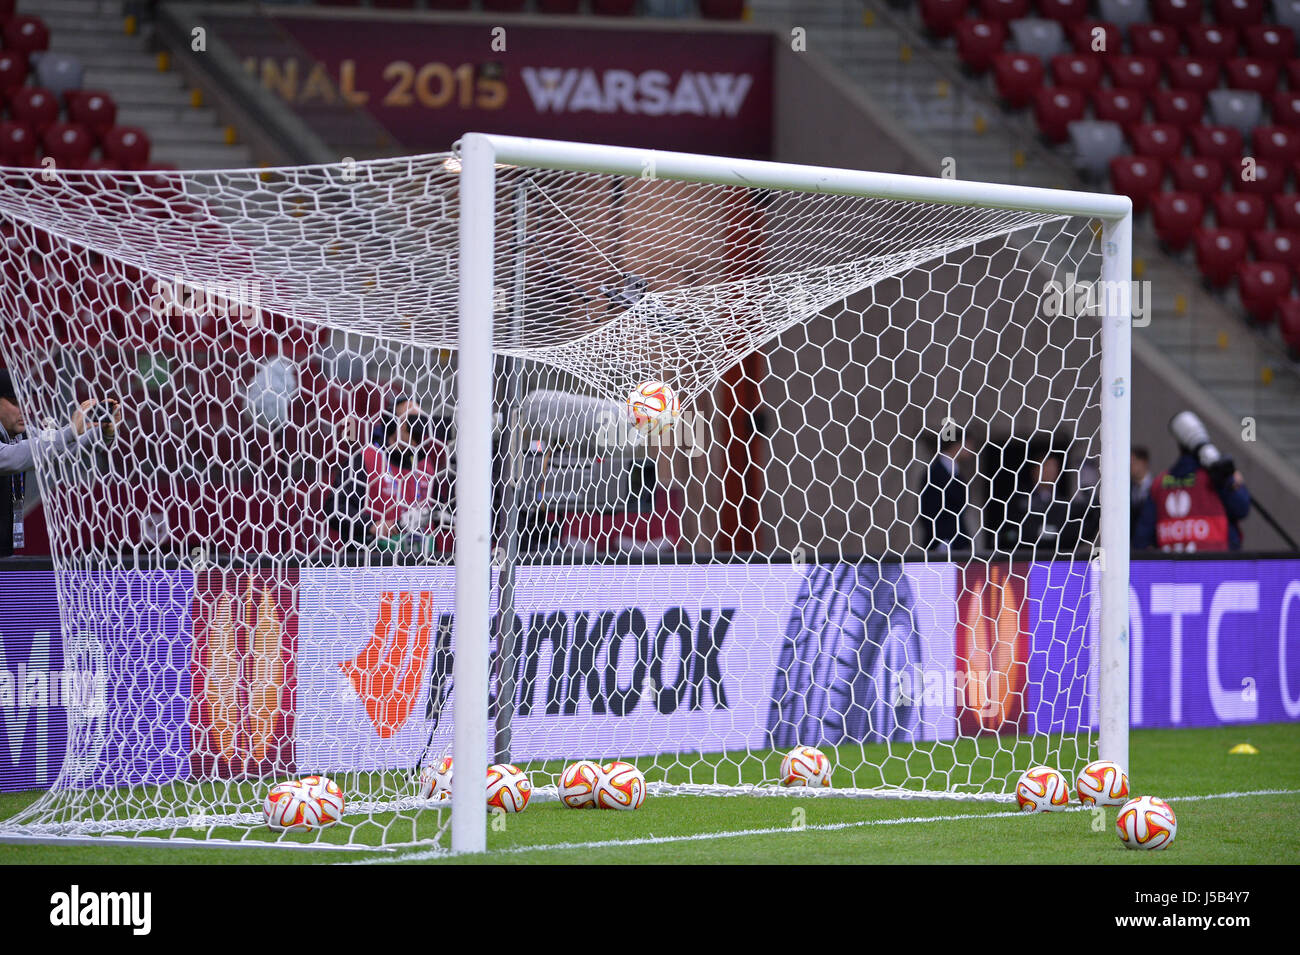 WARSAW, POLAND - MAY 27, 2015: Official UEFA Europa League match balls in the net during Training session before UEFA Europa League Final game Dnipro  Stock Photo